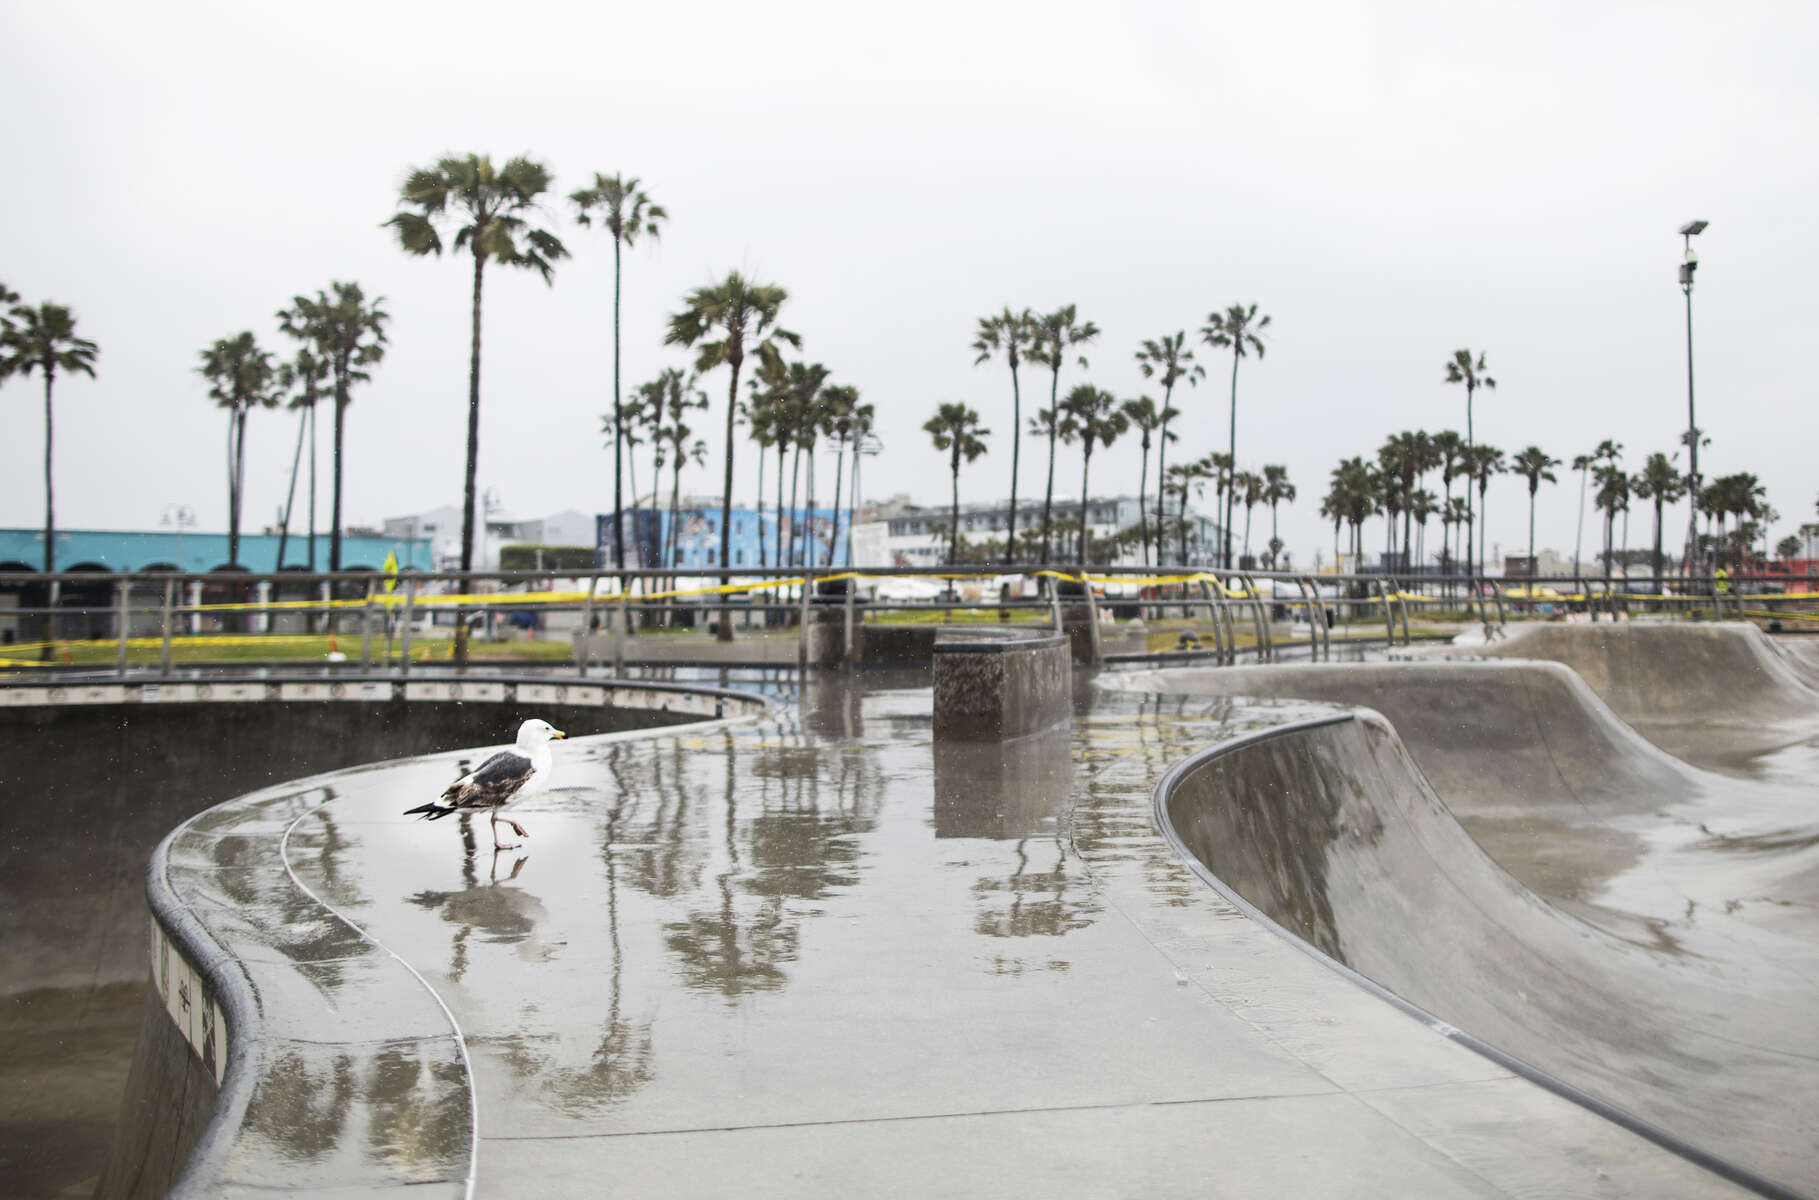 A seagull in the closed skatepark in the Venice neighborhood on April 7, 2020.  Governor Gavin Newsom issues a {quote}stay at Home{quote} order on March 19, to slow the spread of Covid-19, closing all the non-essential businesses.